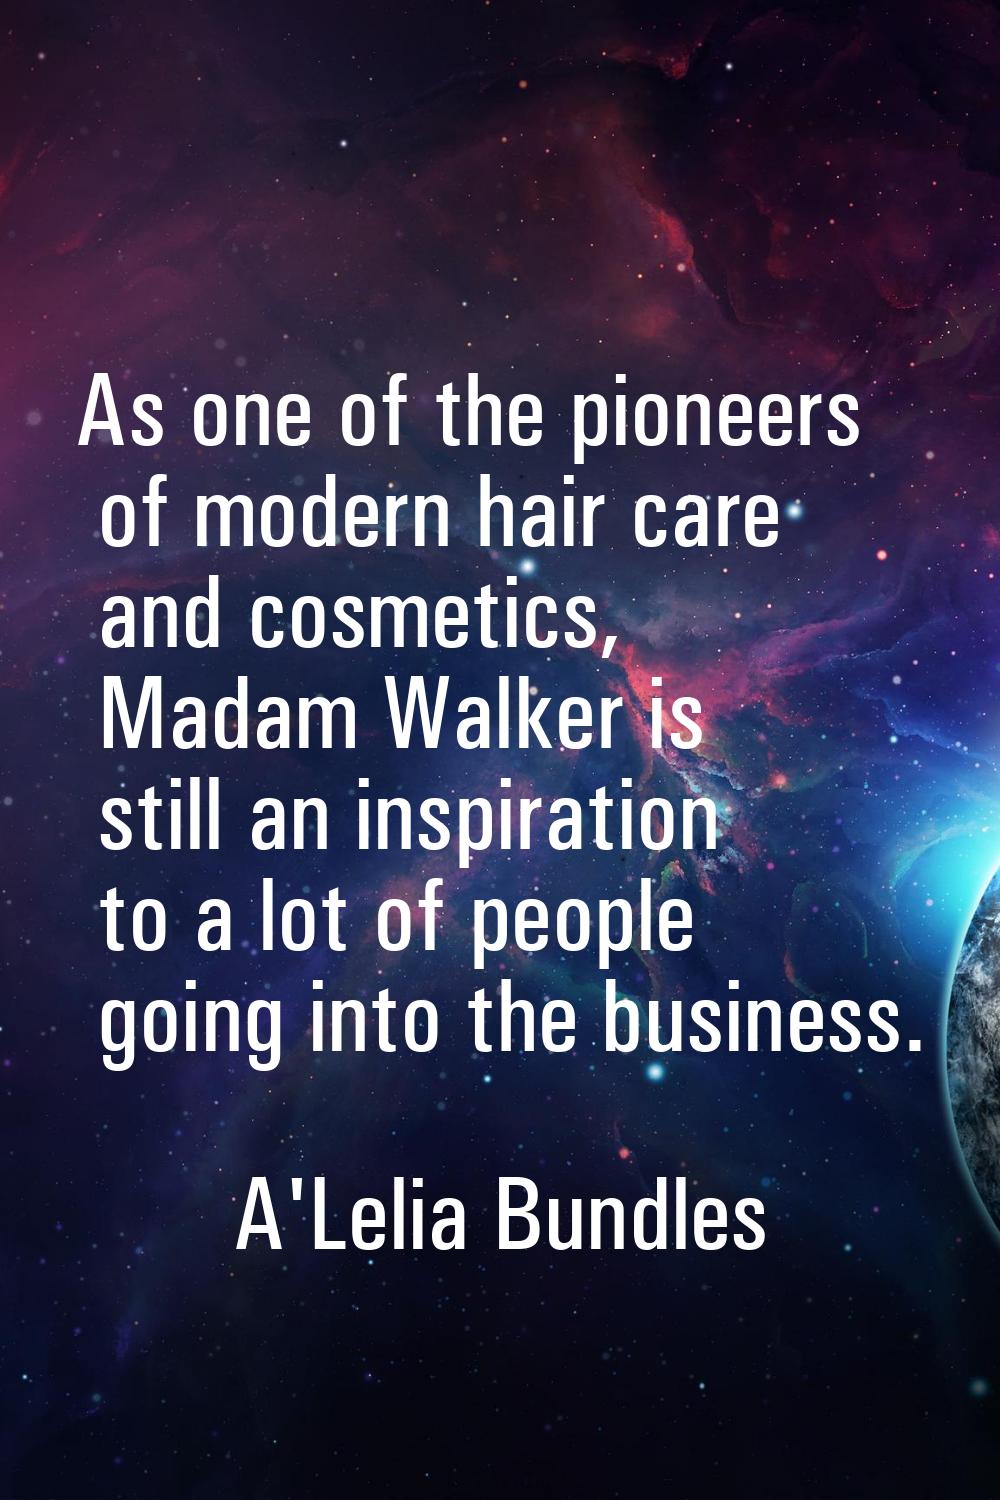 As one of the pioneers of modern hair care and cosmetics, Madam Walker is still an inspiration to a